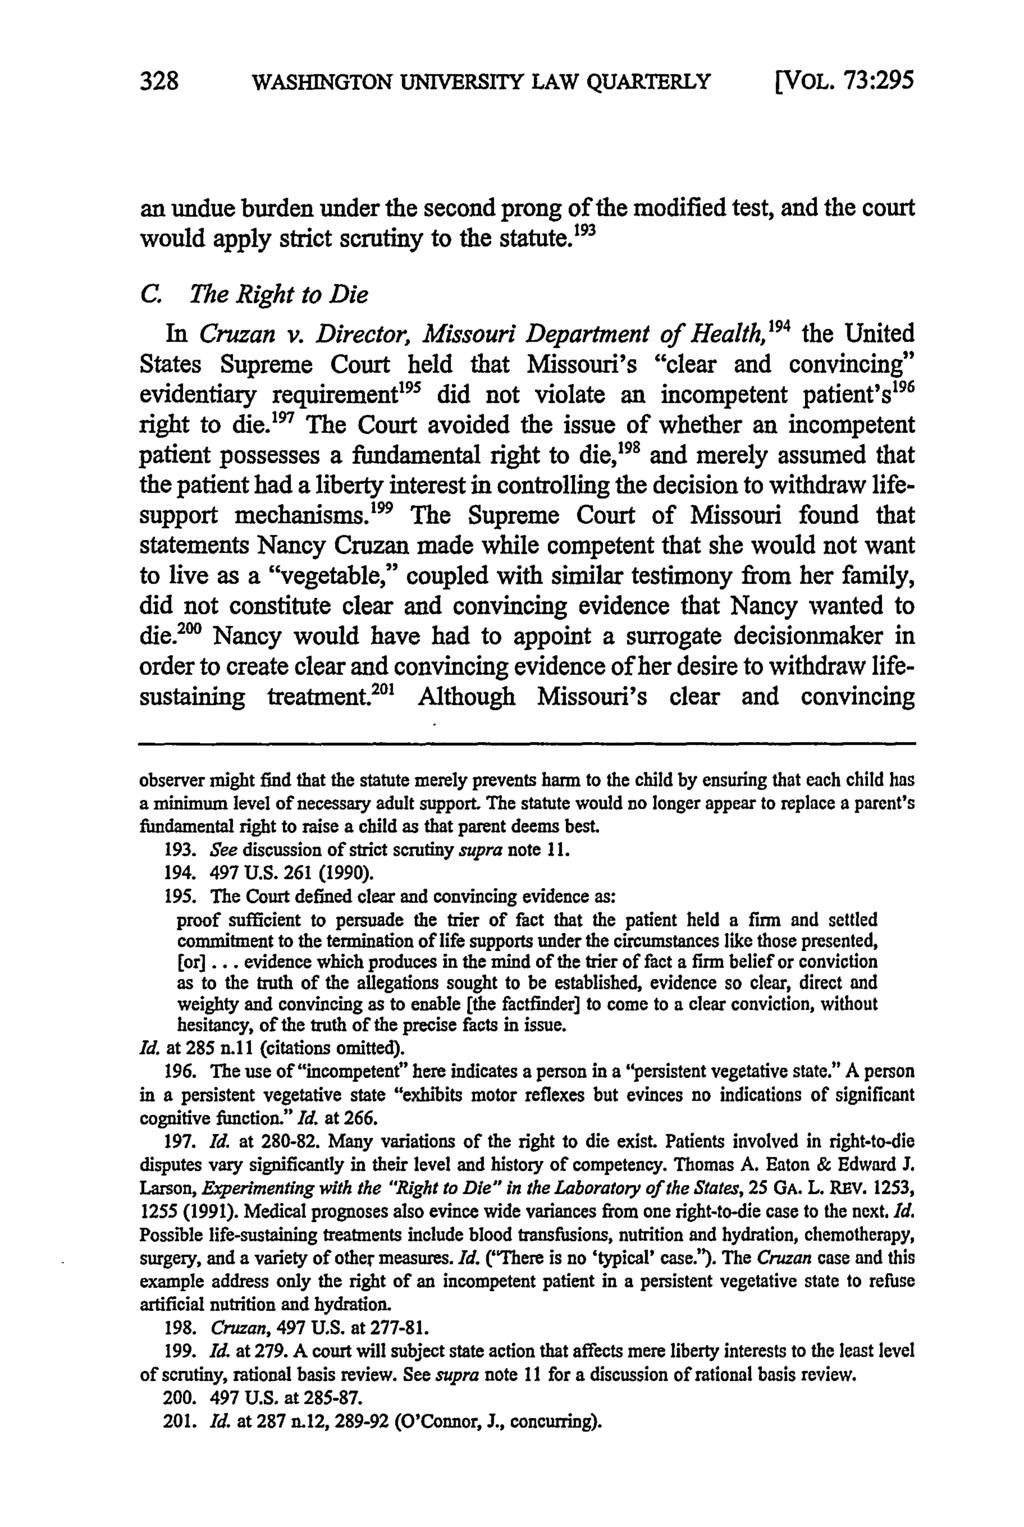 WASHINGTON UNIVERSITY LAW QUARTERLY [VOL. 73:295 an undue burden under the second prong of the modified test, and the court would apply strict scrutiny to the statute. 193 C.